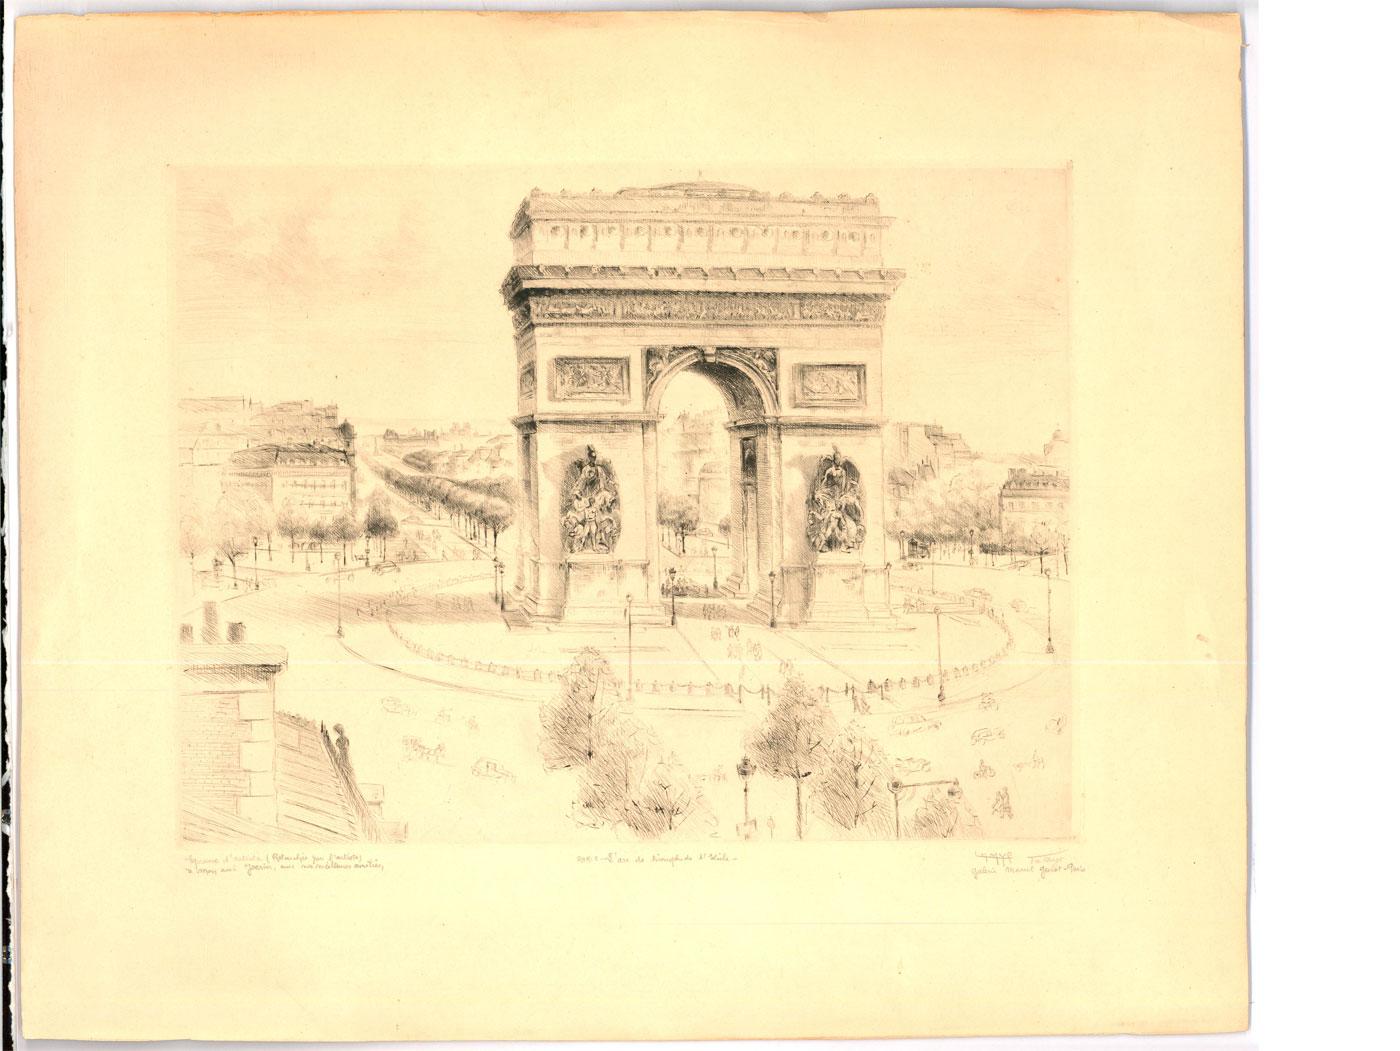 An extremely fine architectural etching depicting the French monument, the l'Arc de Triomphe, at the west end of the Champs-Élysées. The artist's perfect perspective and accurate observation skills are unmistakable in this excellent representation